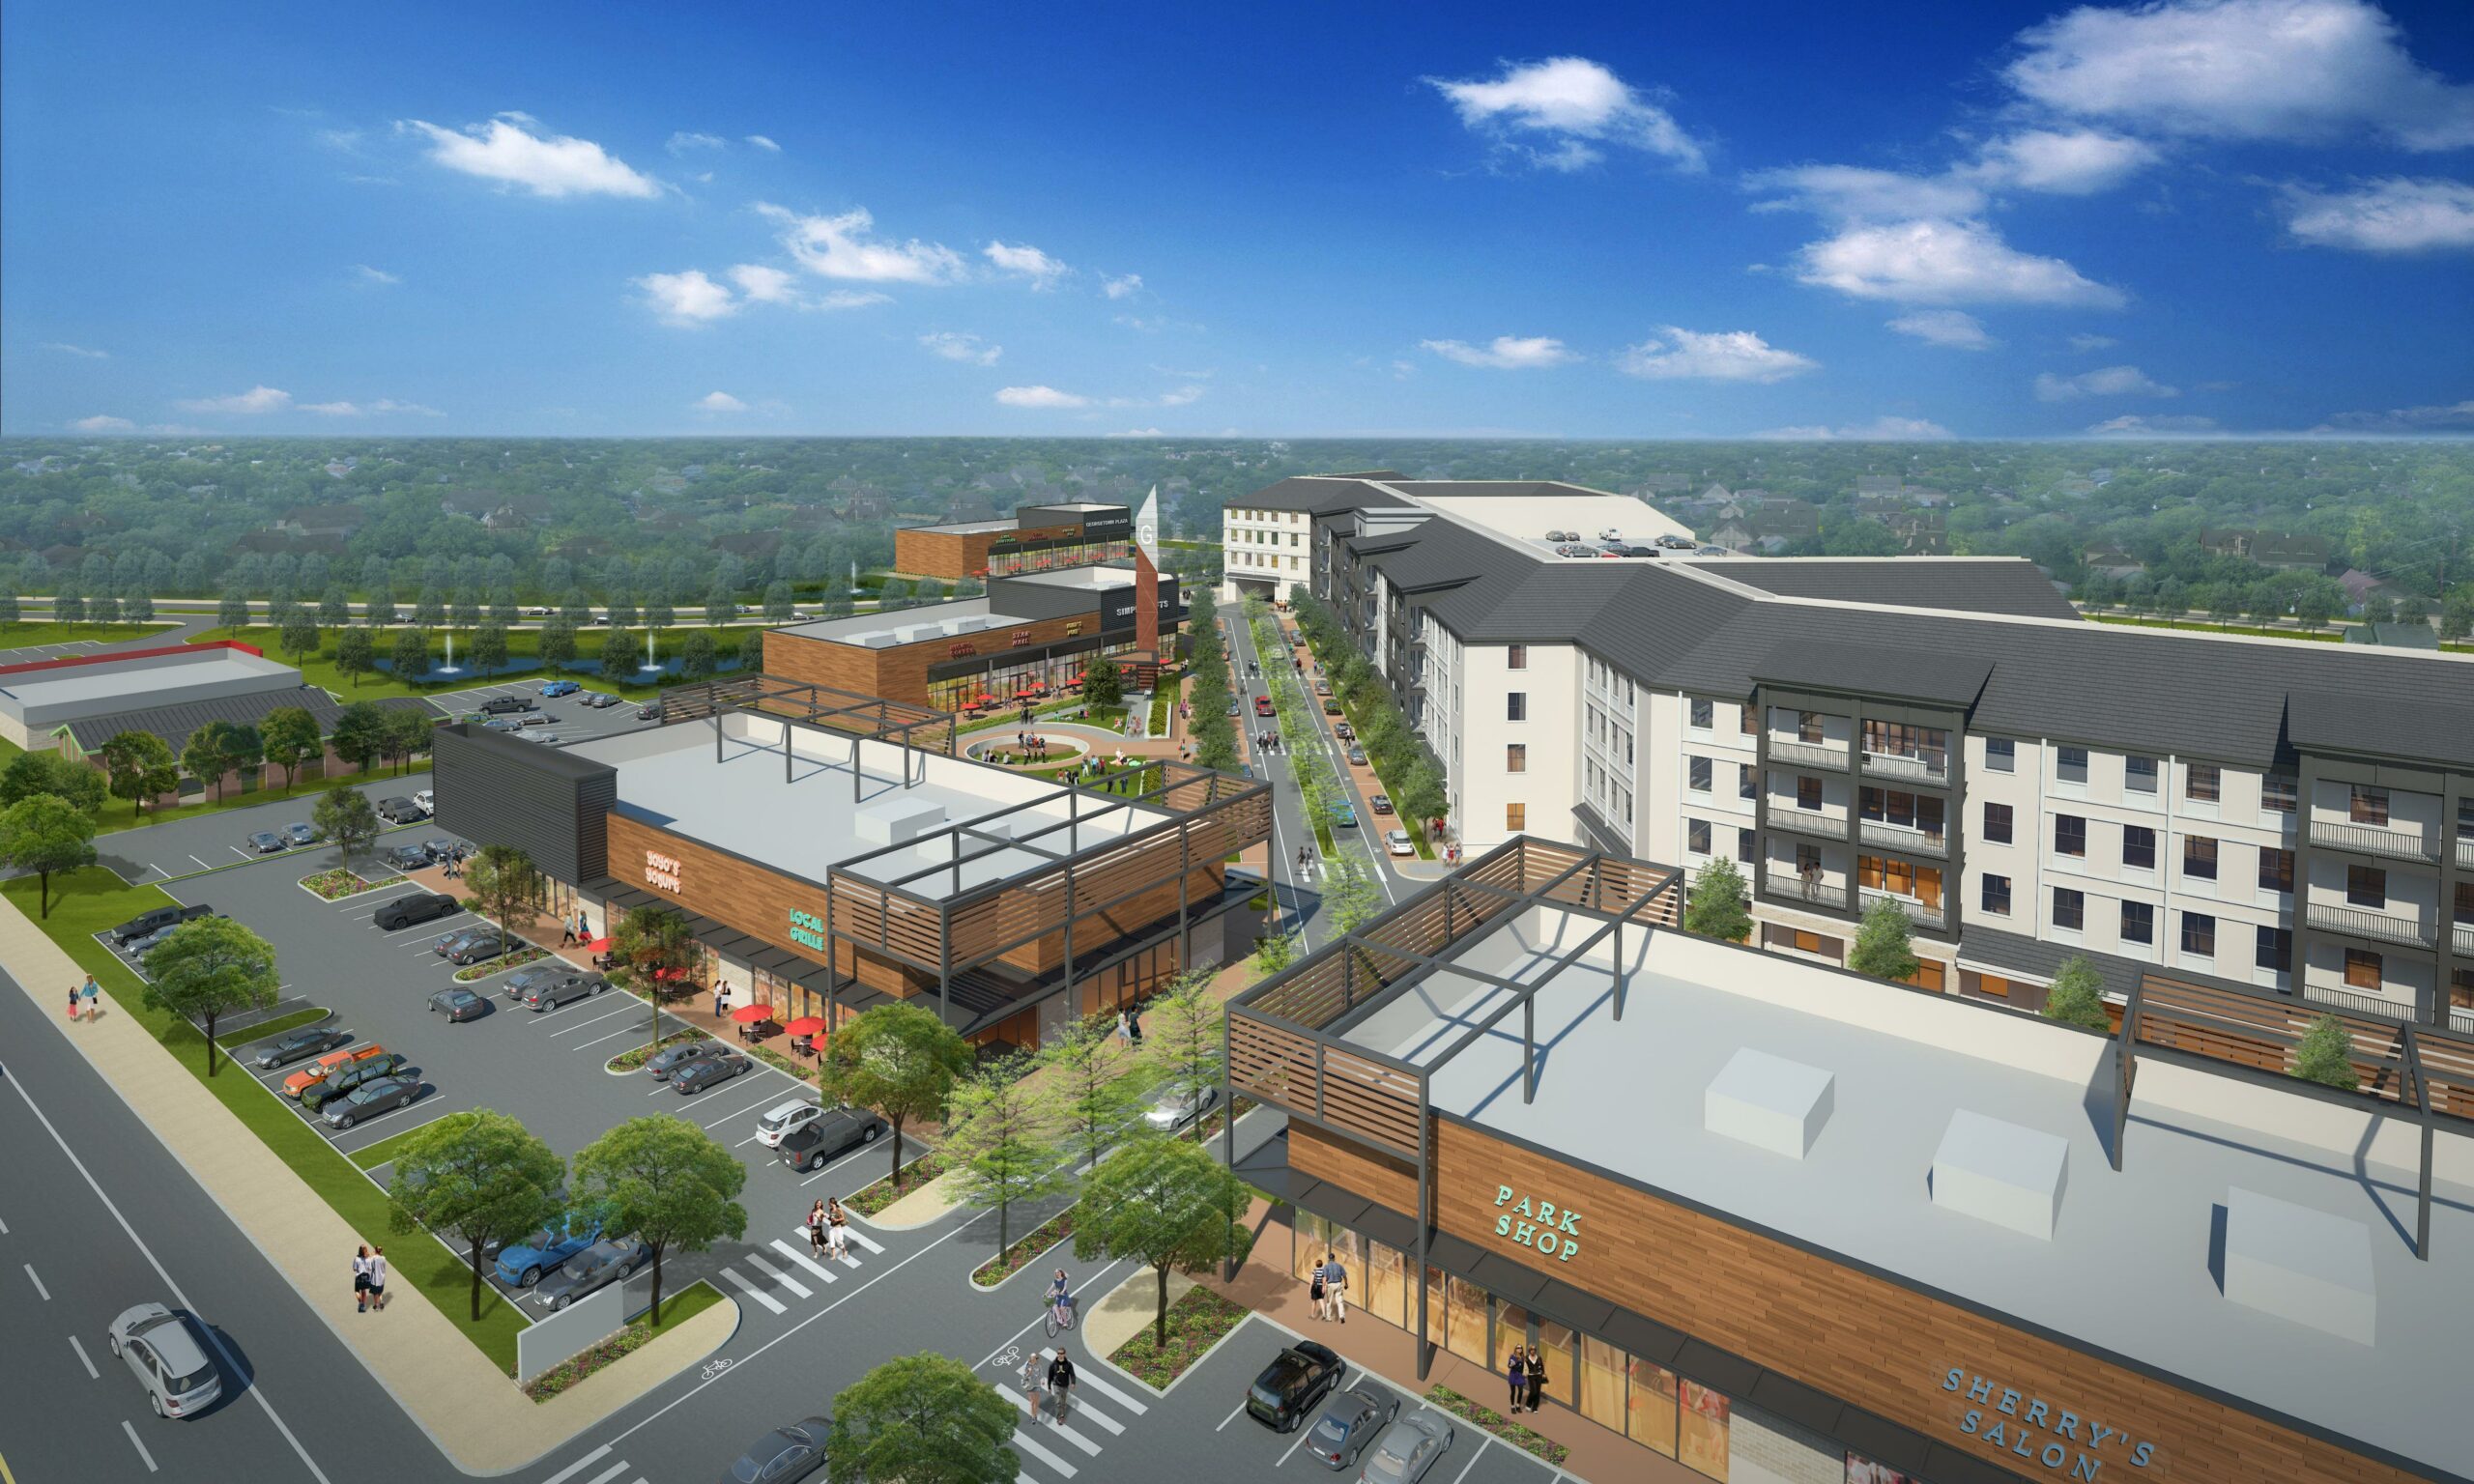 Novak acquires approximately six acres from Partners to create apartment anchor for The Commons At Rivery, a new mixed-use development at the gateway to Georgetown, TX.